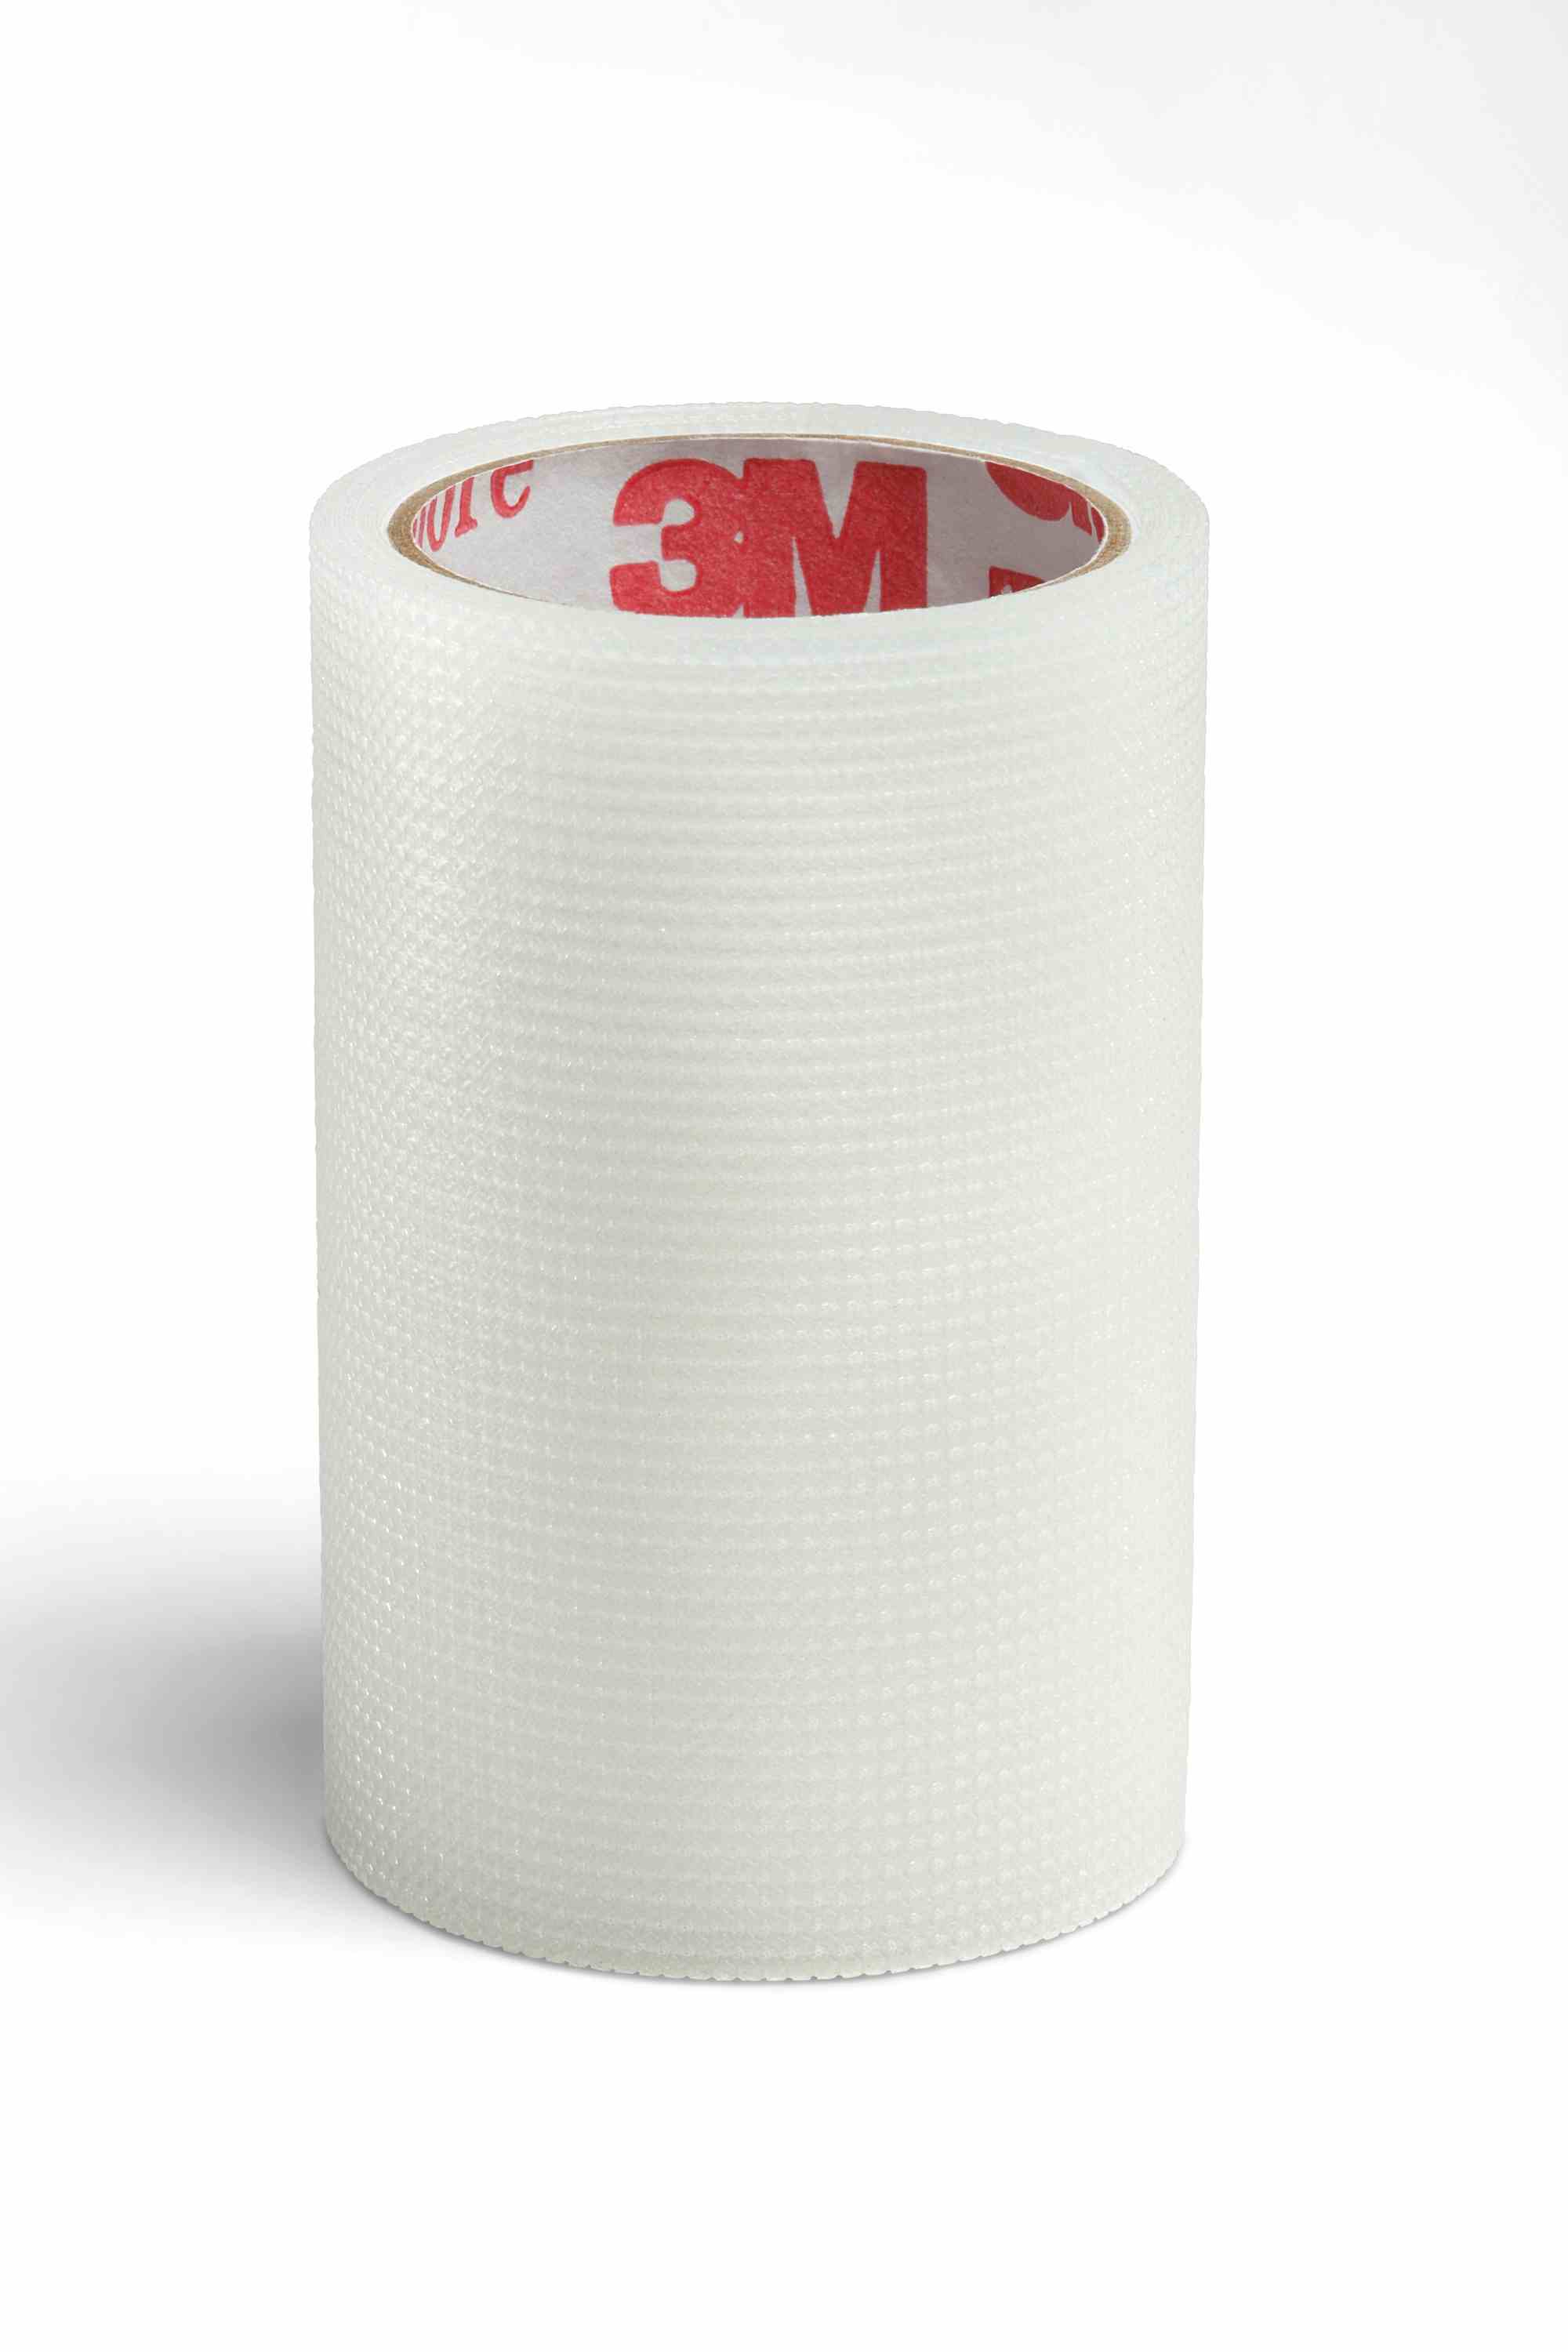  3M Transpore Water Resistant Plastic Medical Tape, 2" X 1.5 yd, 1527S-2, Box of 50